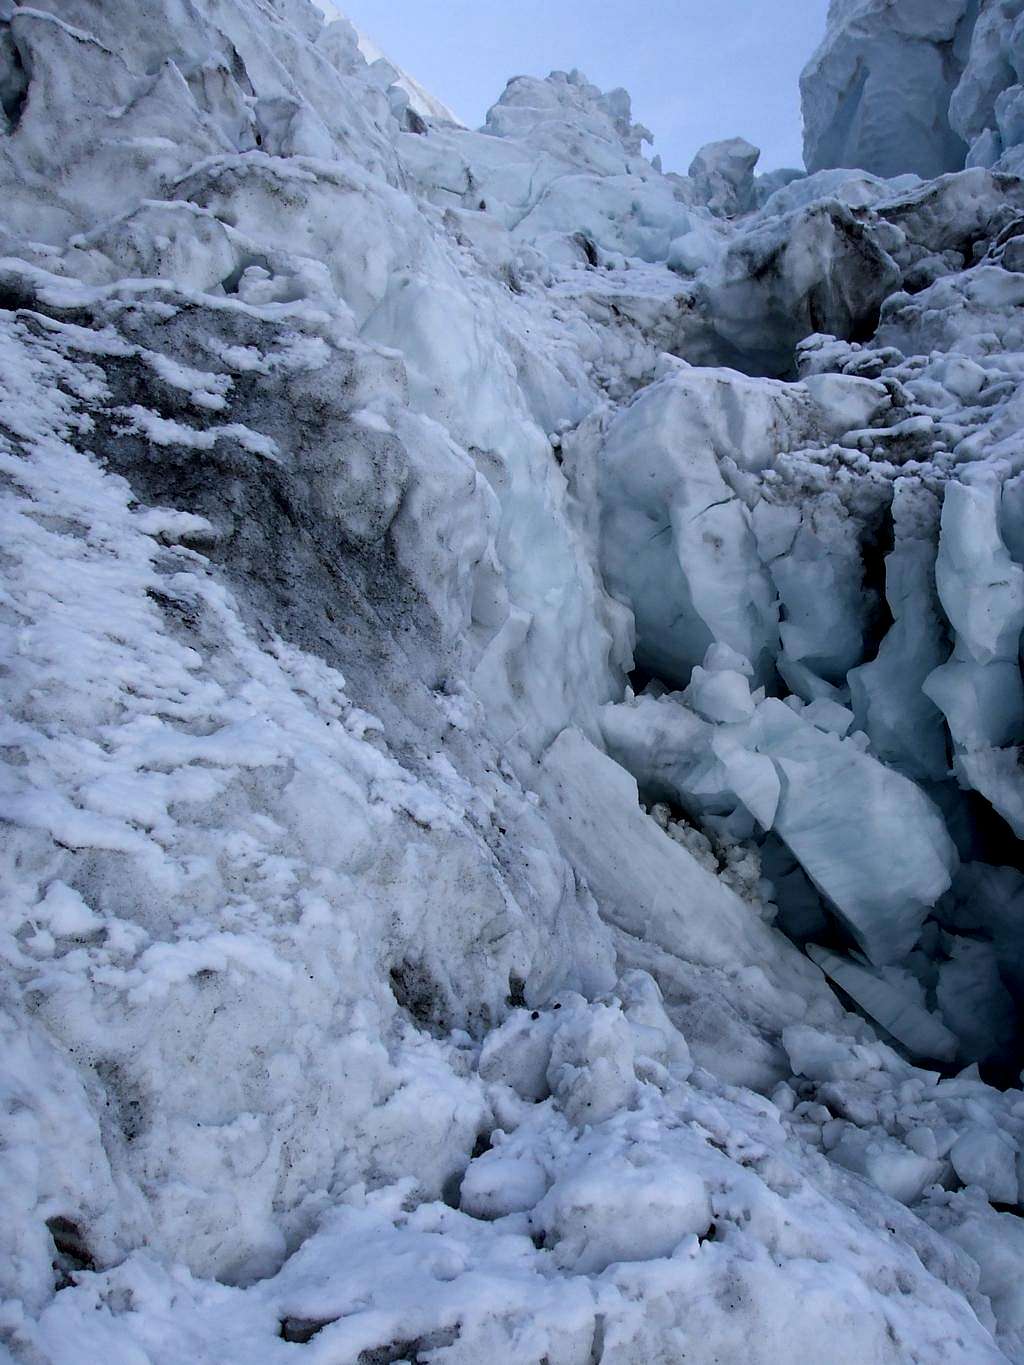 Seracs loomed in the entrance to the terrifying icefall